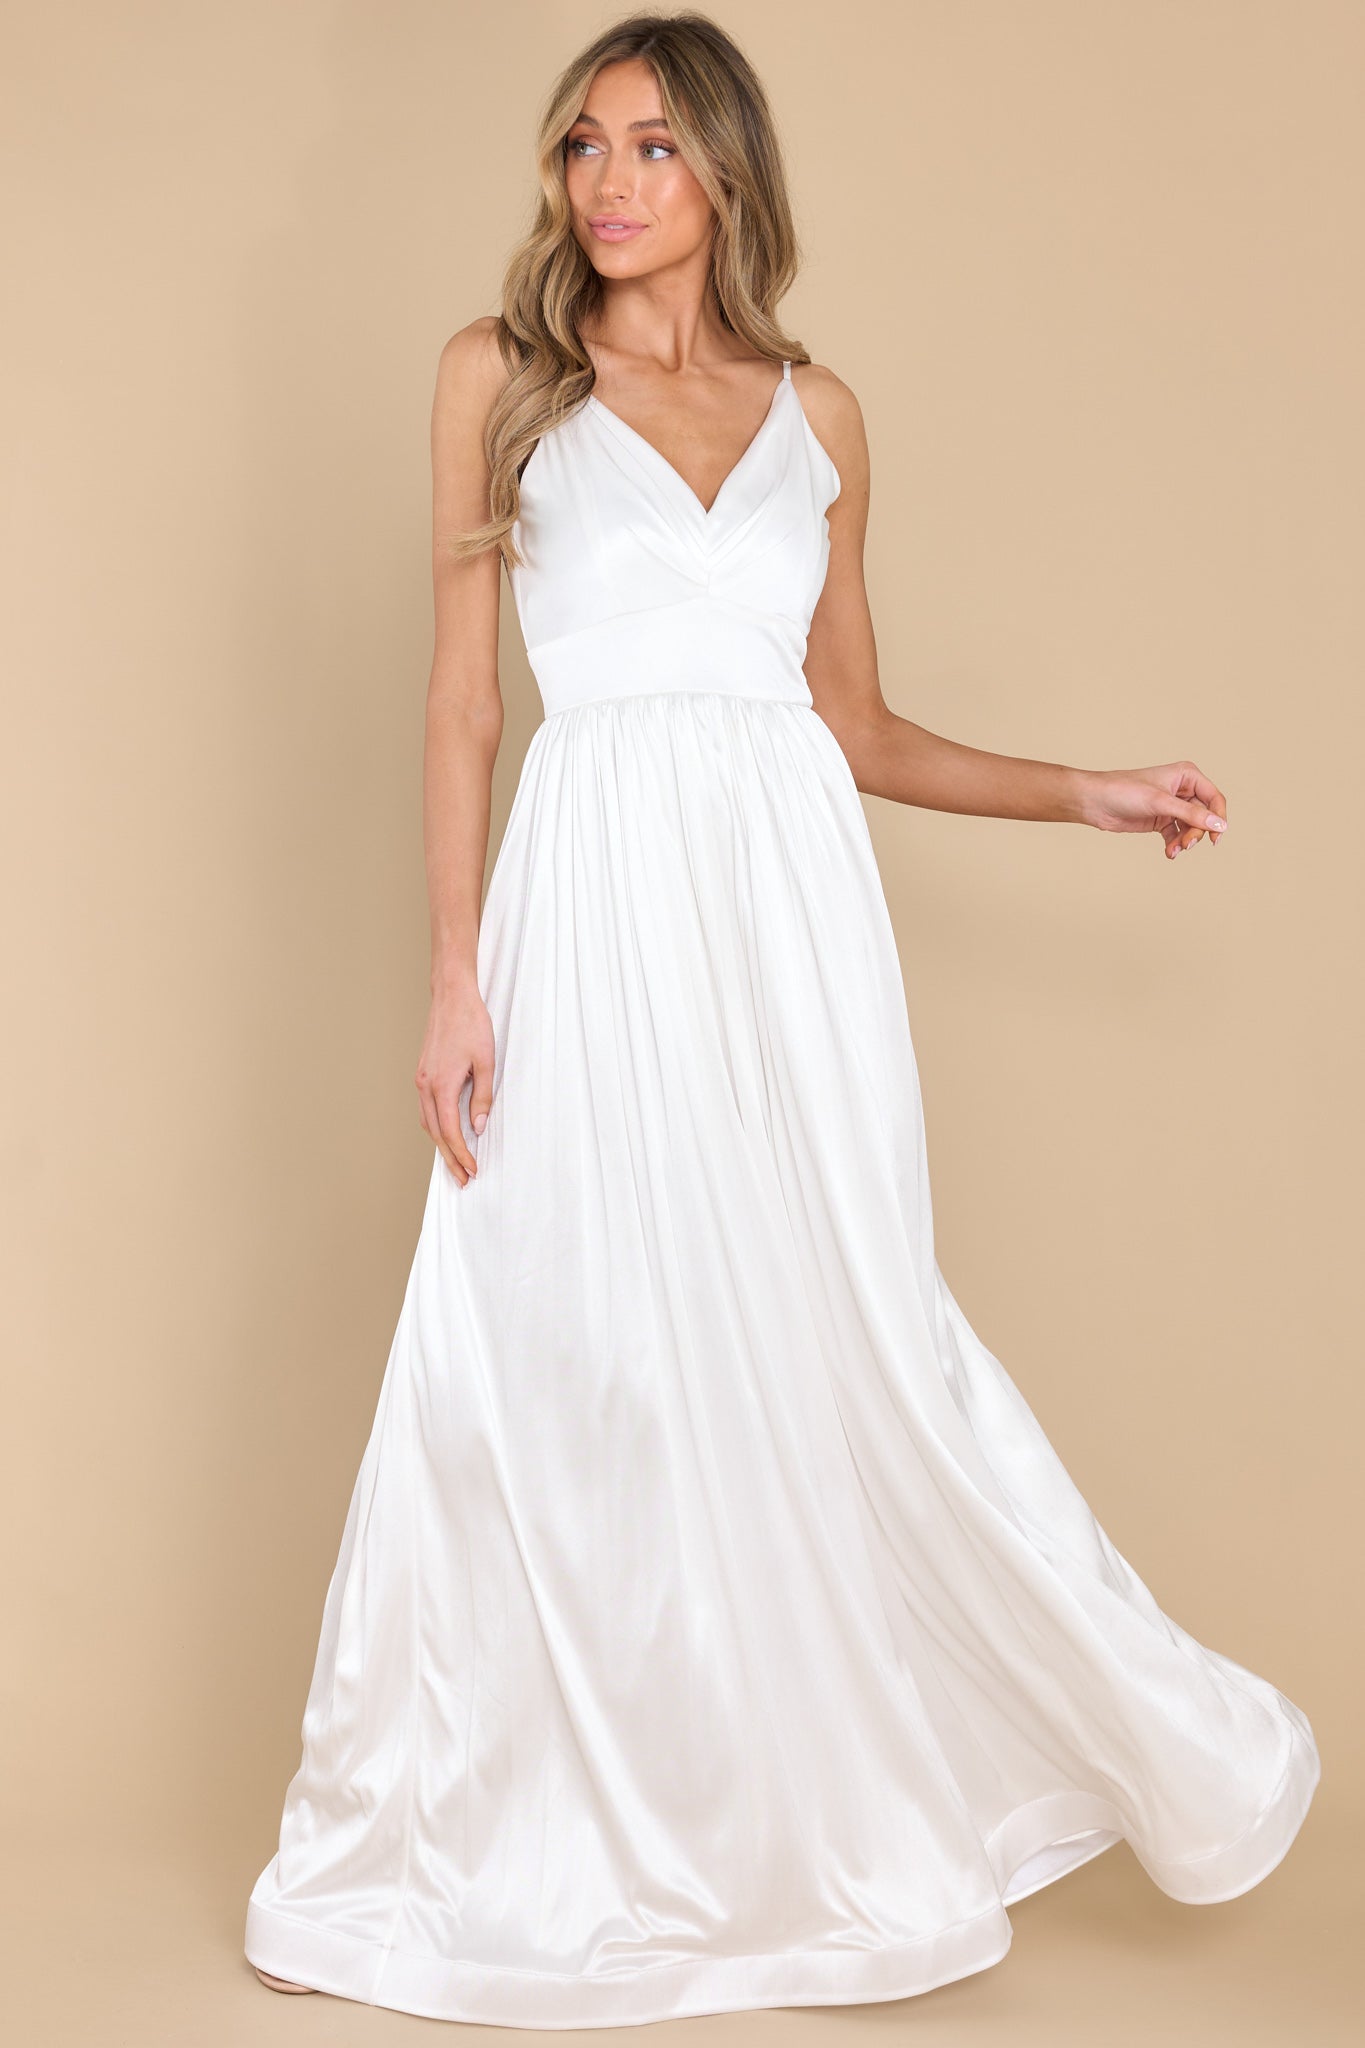 Dreamy Ivory Maxi Dress - For The Bachelorette